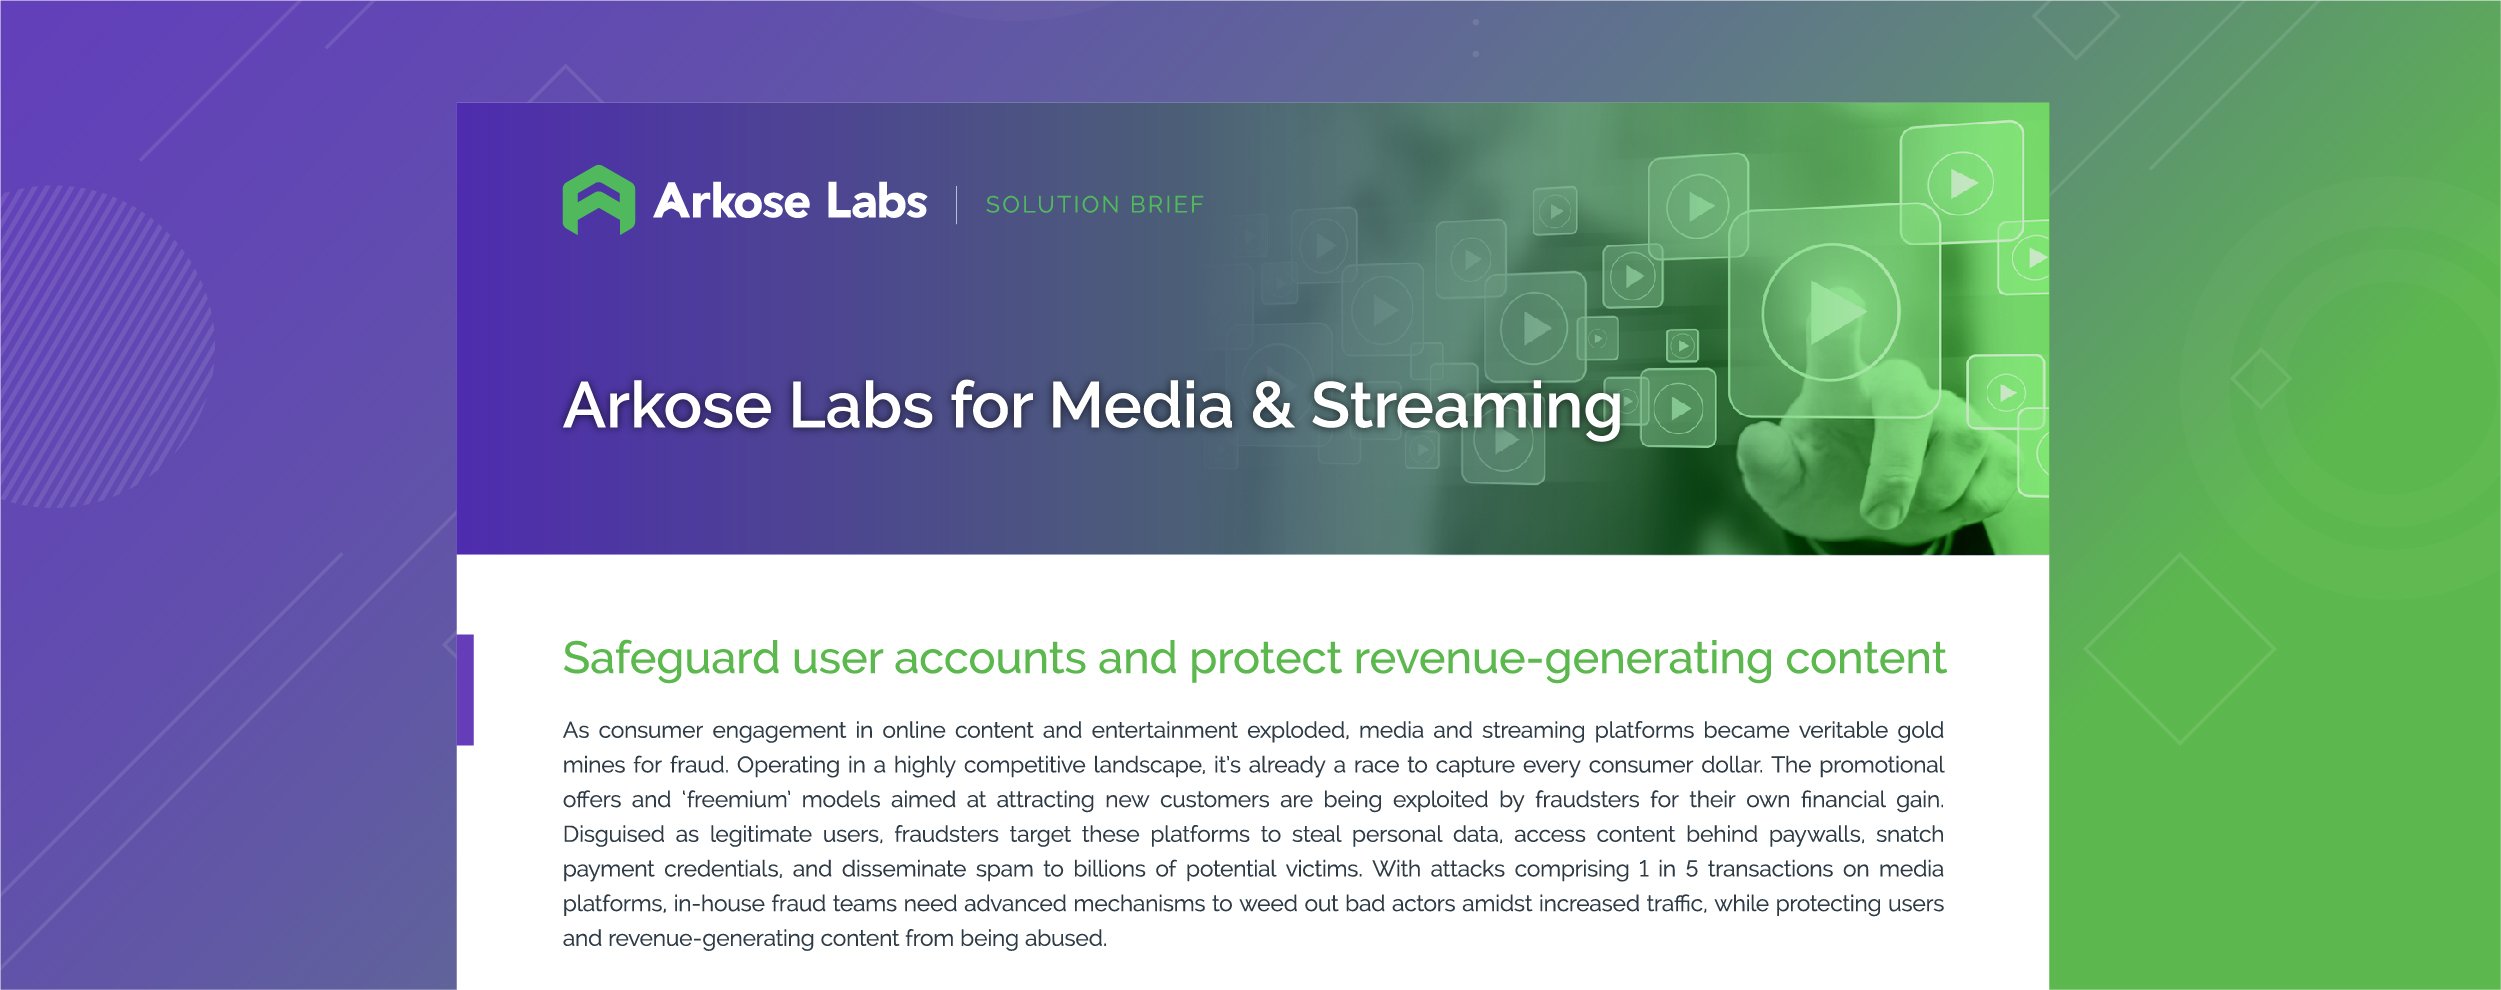 Media and Streaming: Secure Access to Your Content from Malicious Attacks and Protect Revenue